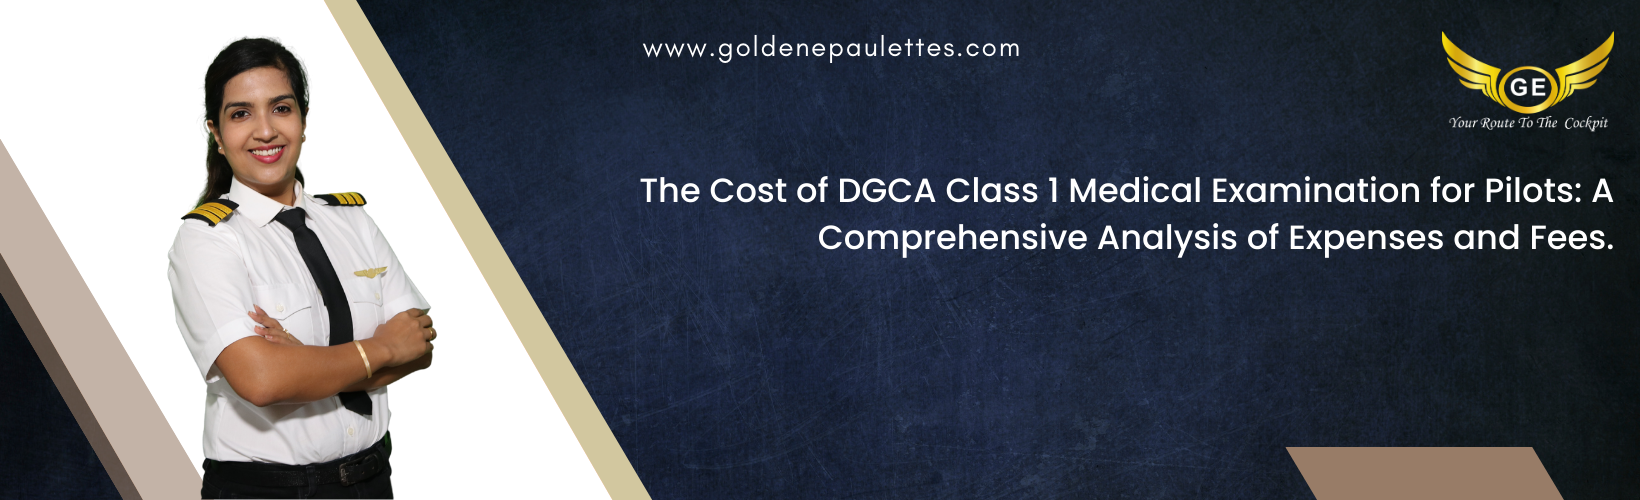 The Cost of a DGCA Class 1 Medical Exam for Pilots